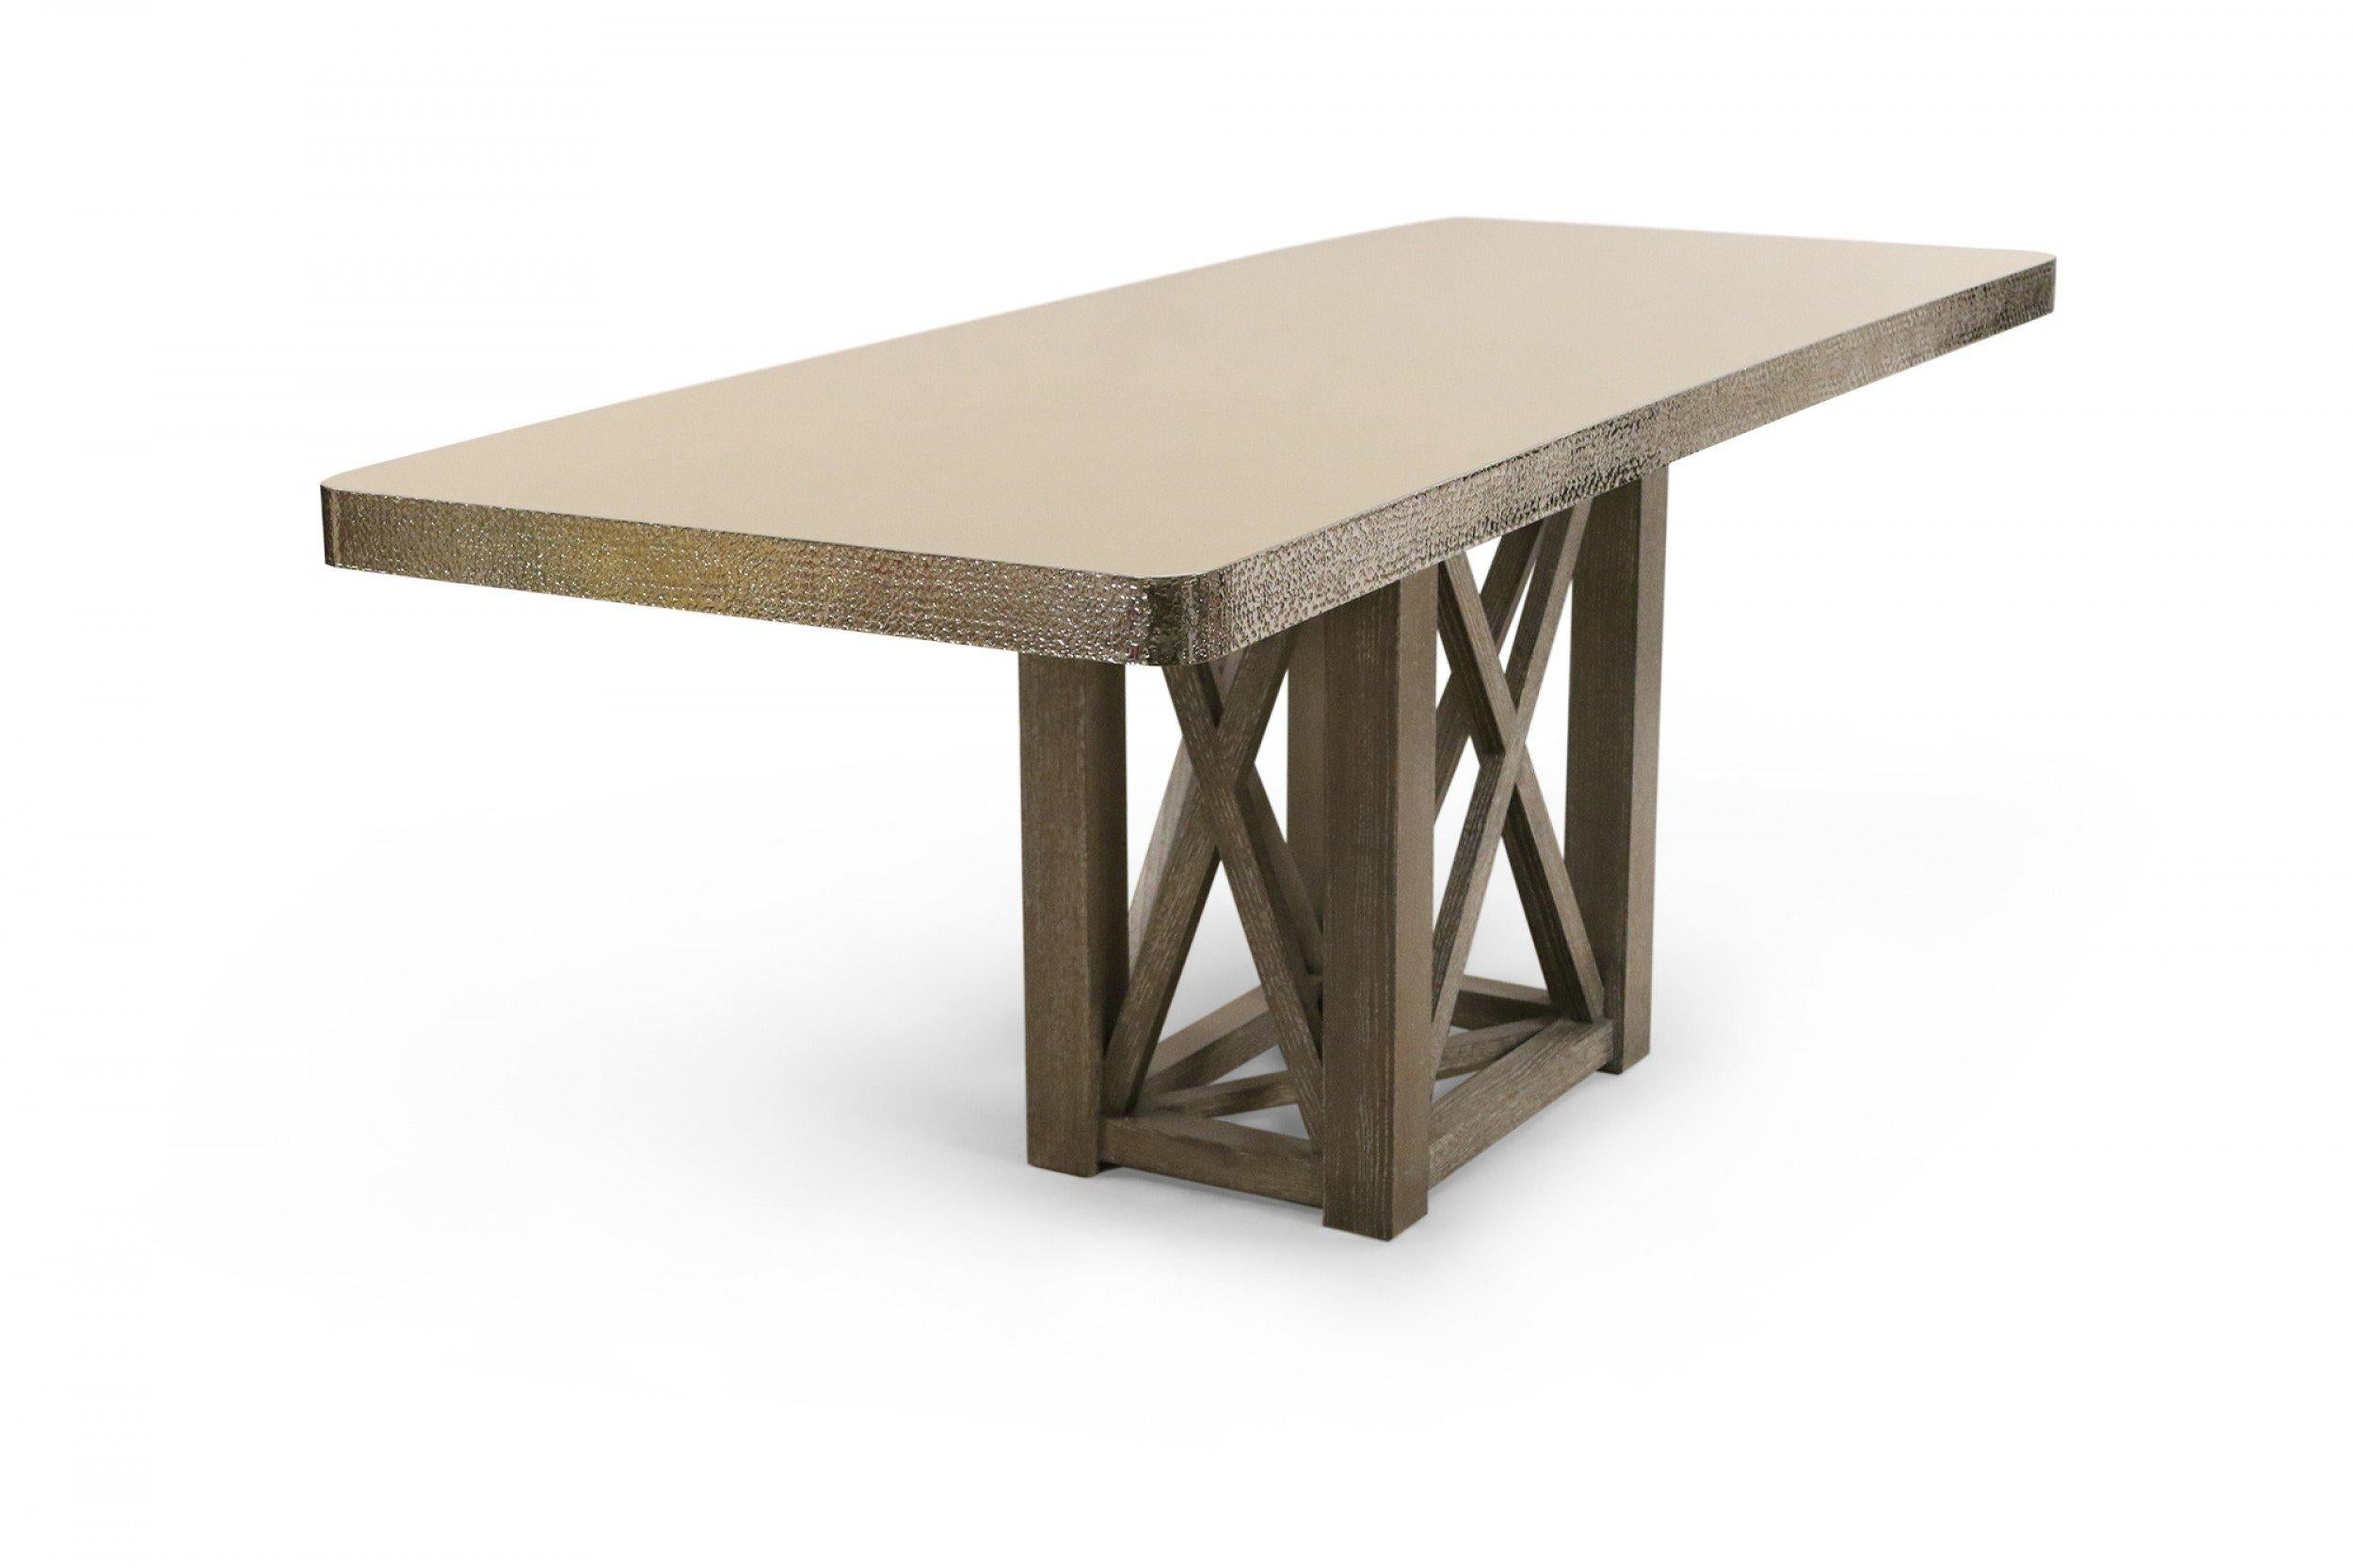 20th Century Contemporary Cerused Wood and Hammered Silver Metal Dining Table